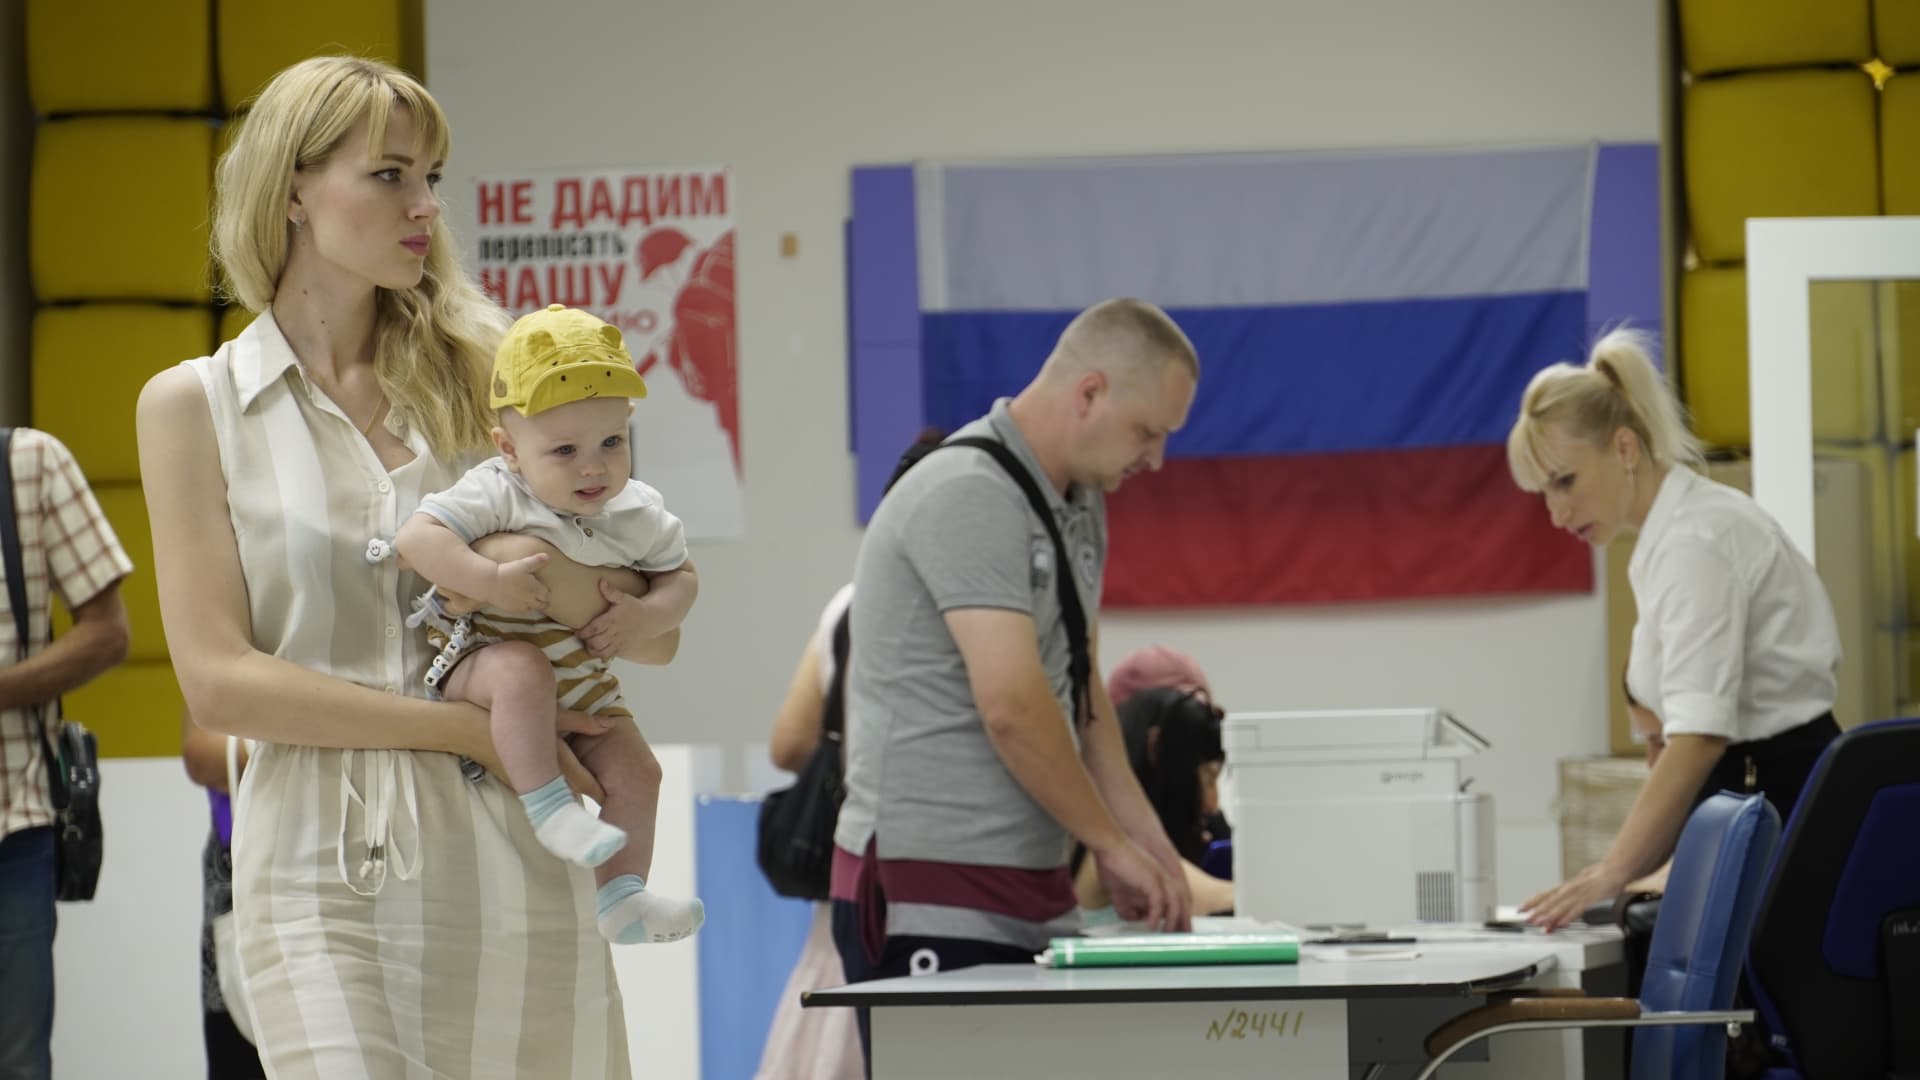 Referendum voting in Russian-occupied territories of Ukraine is underway, Russian state media has reported. Western and Ukrainian officials are rebuki